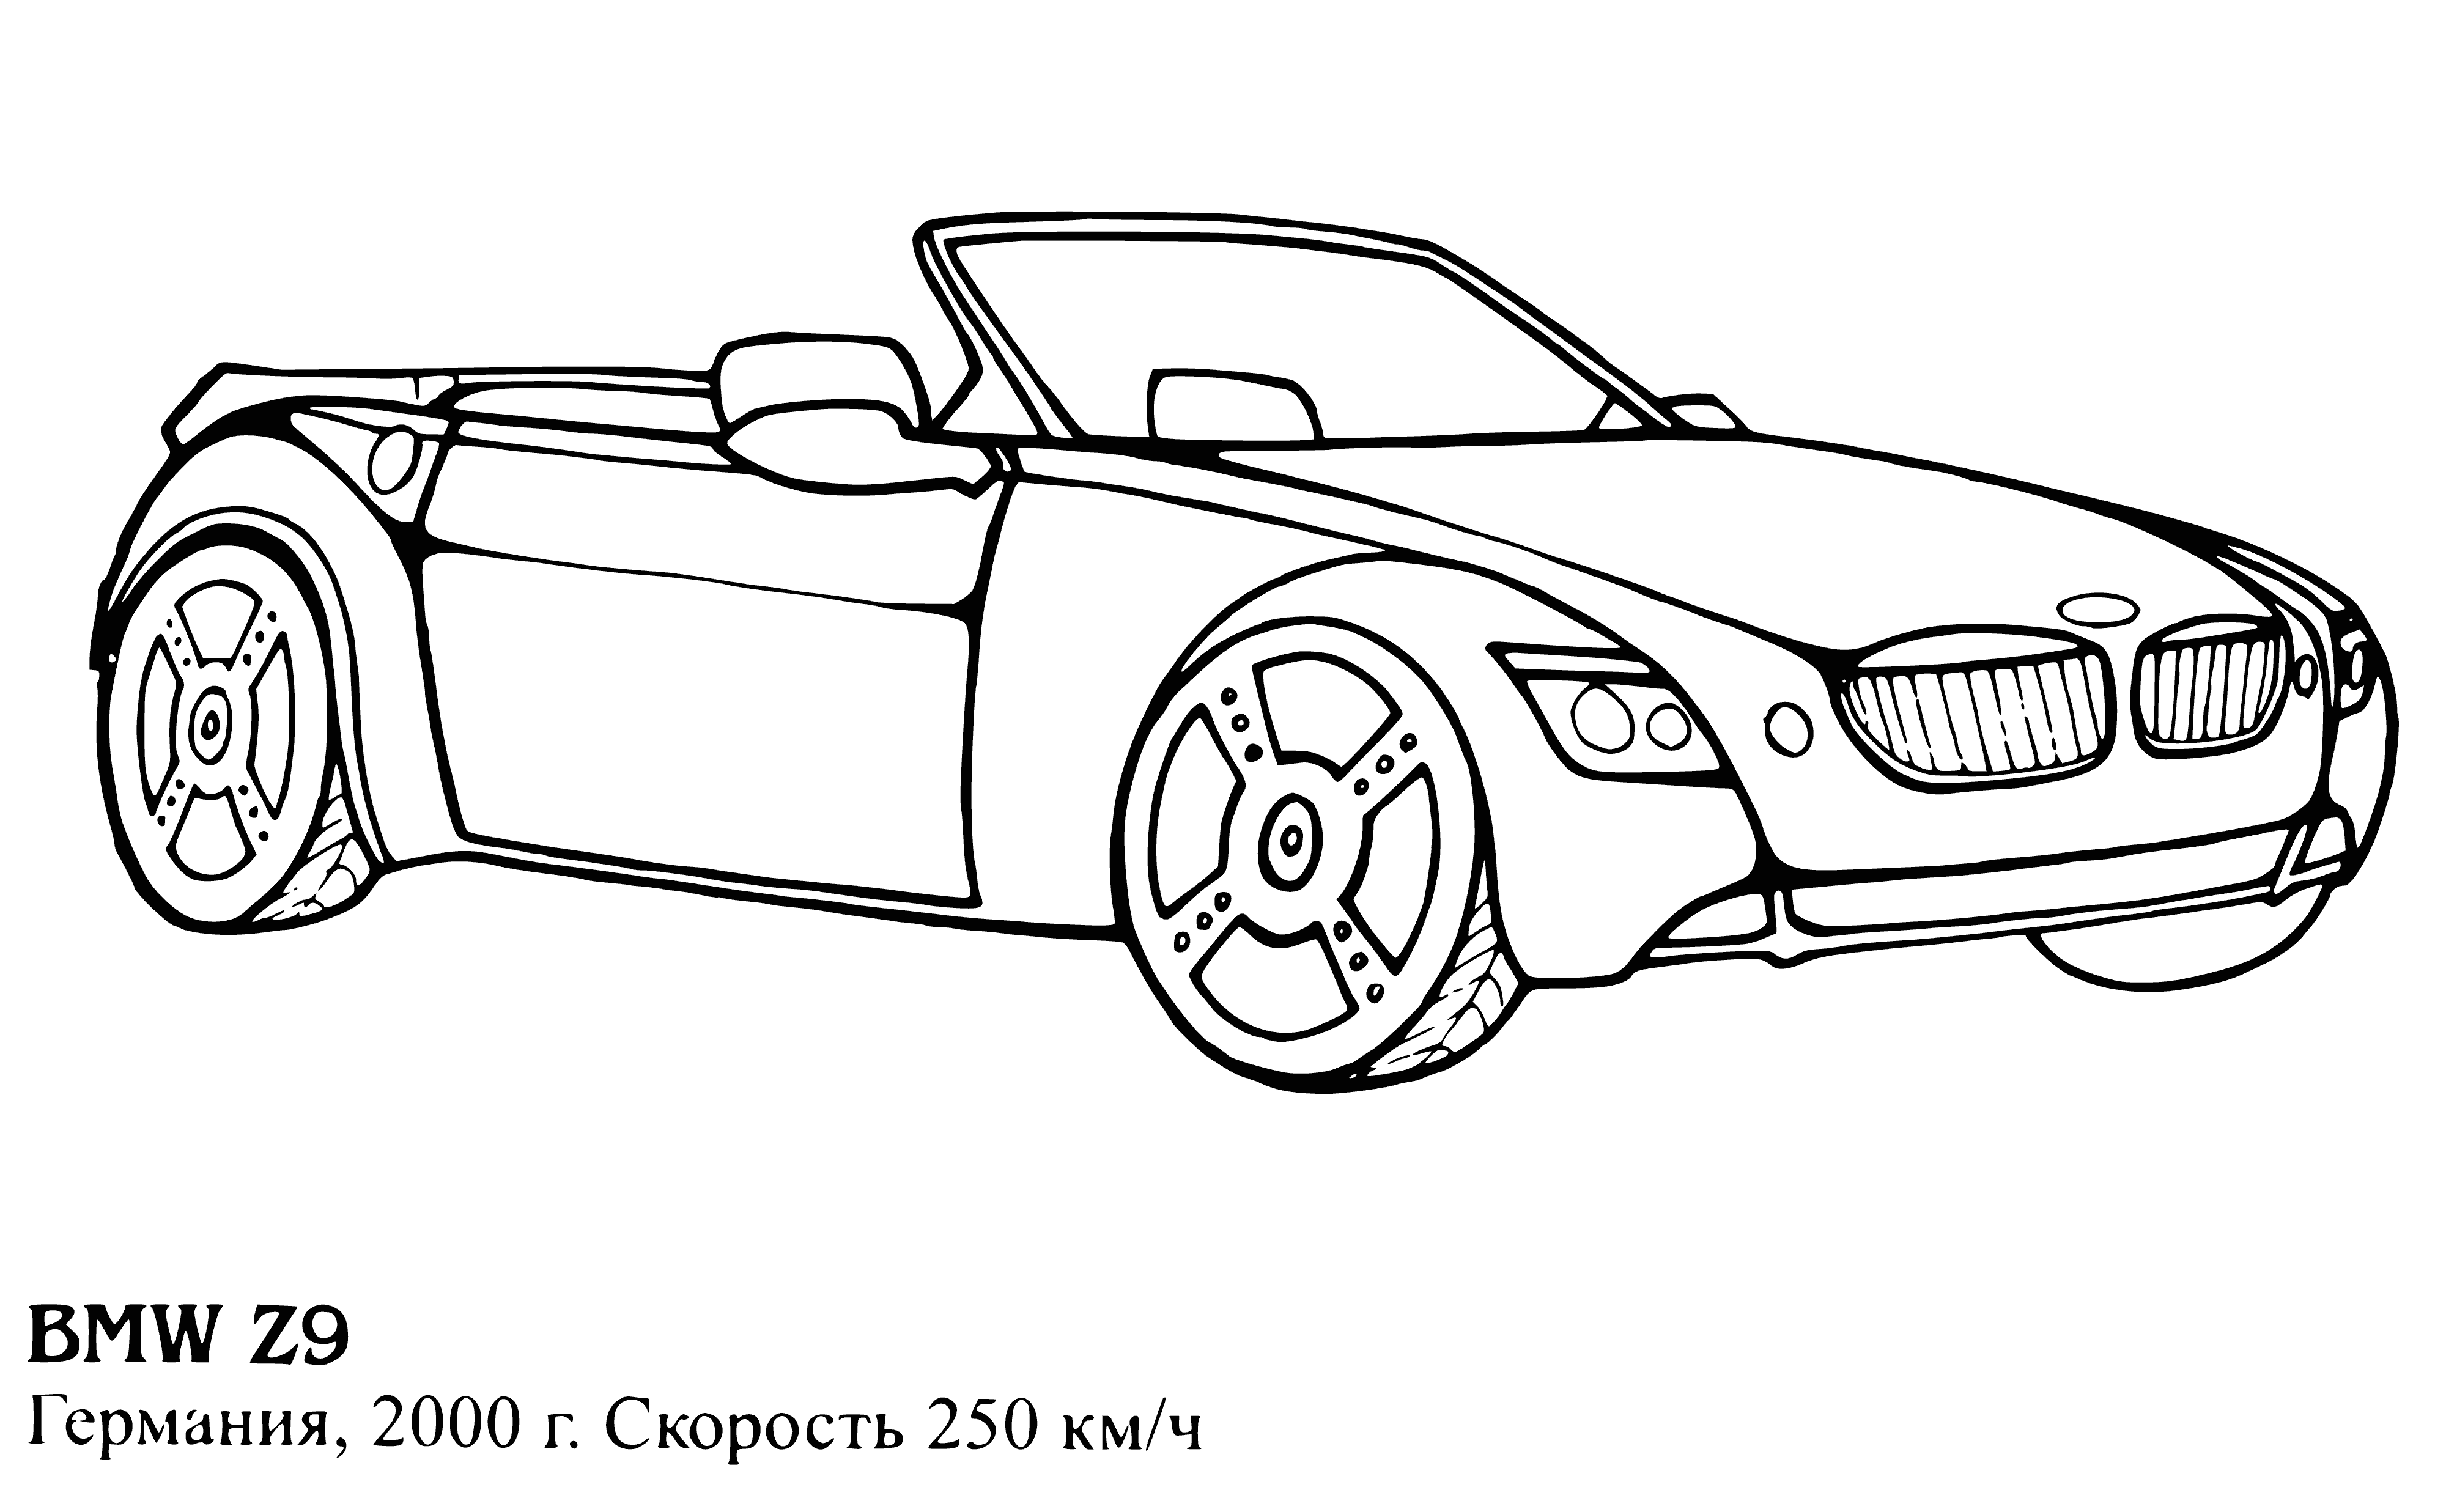 BMW Z9 coloring page